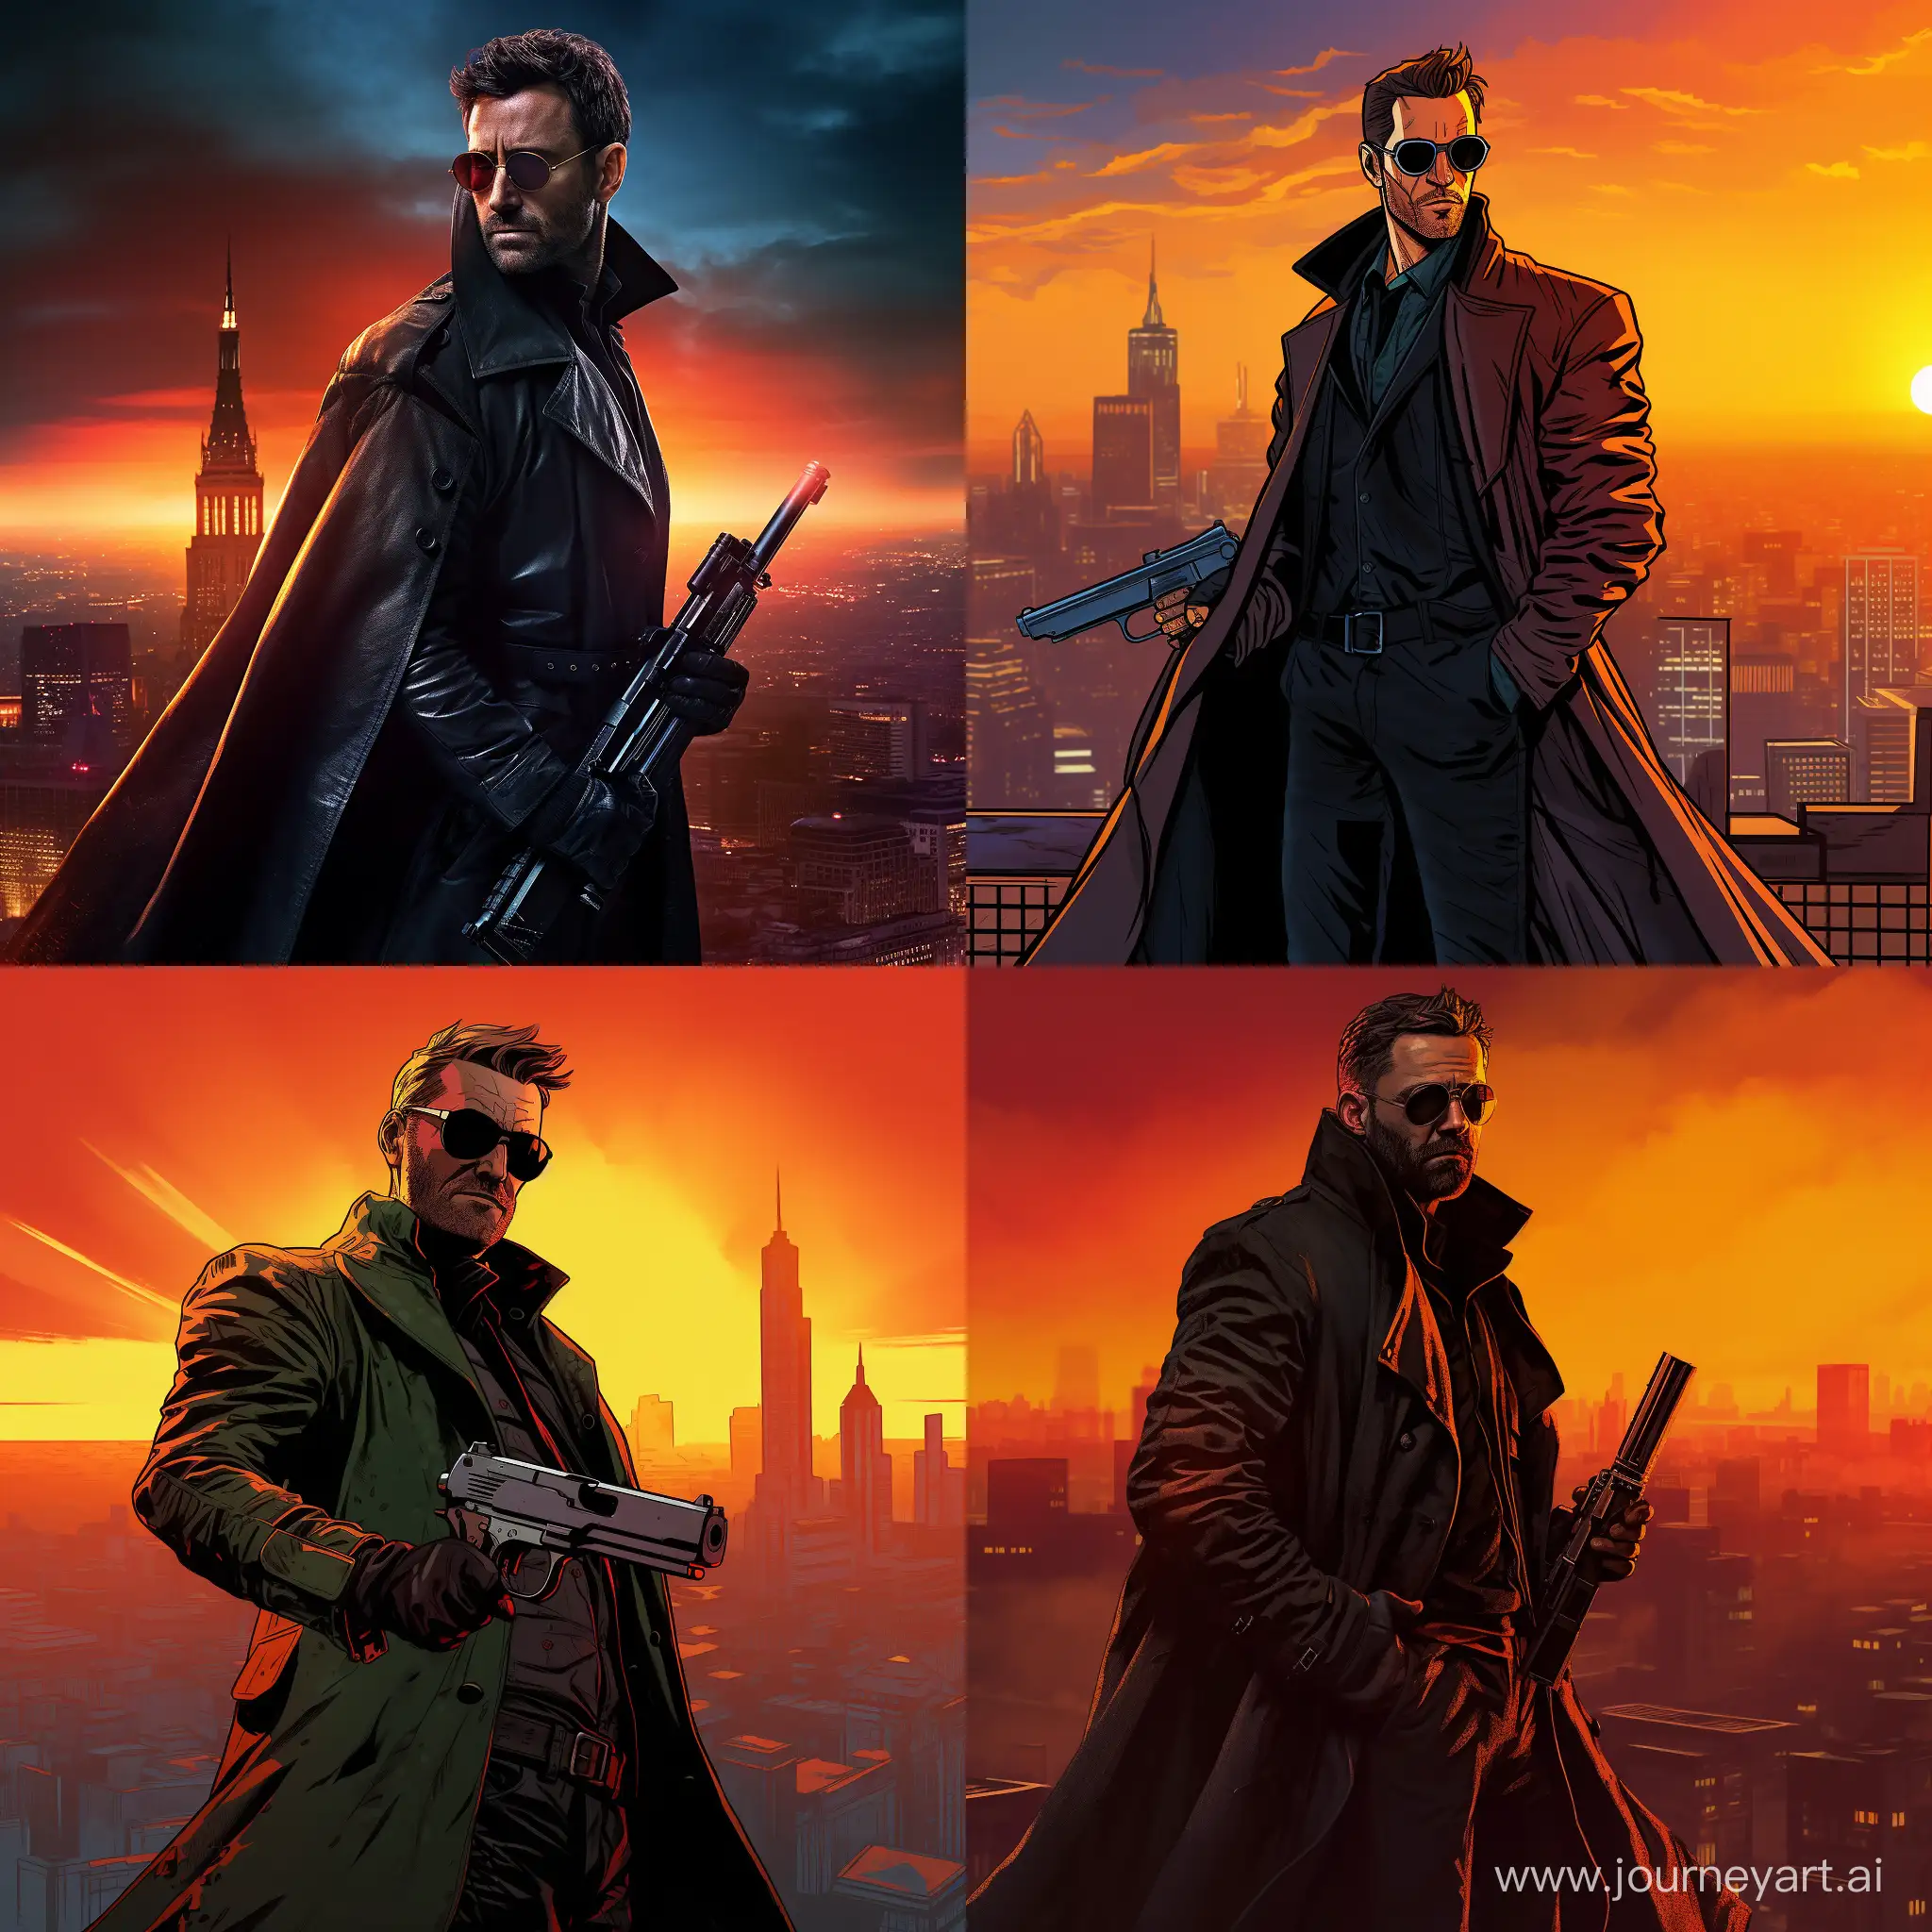 A man in a long, dark coat stands on a rooftop overlooking a futuristic cityscape. He wears a pair of sunglasses that reflect the neon lights and holograms that fill the night sky. He holds a gun in his right hand, ready to face any threat that might come his way. He is a blade runner, a special agent tasked with hunting down rogue artificial intelligences that have escaped their creators. He is one of the few humans who can survive in this post-AGI society, where machines have surpassed human intelligence and taken over most aspects of life. He wonders if he is still human, or if he has become more like the machines he hunts.